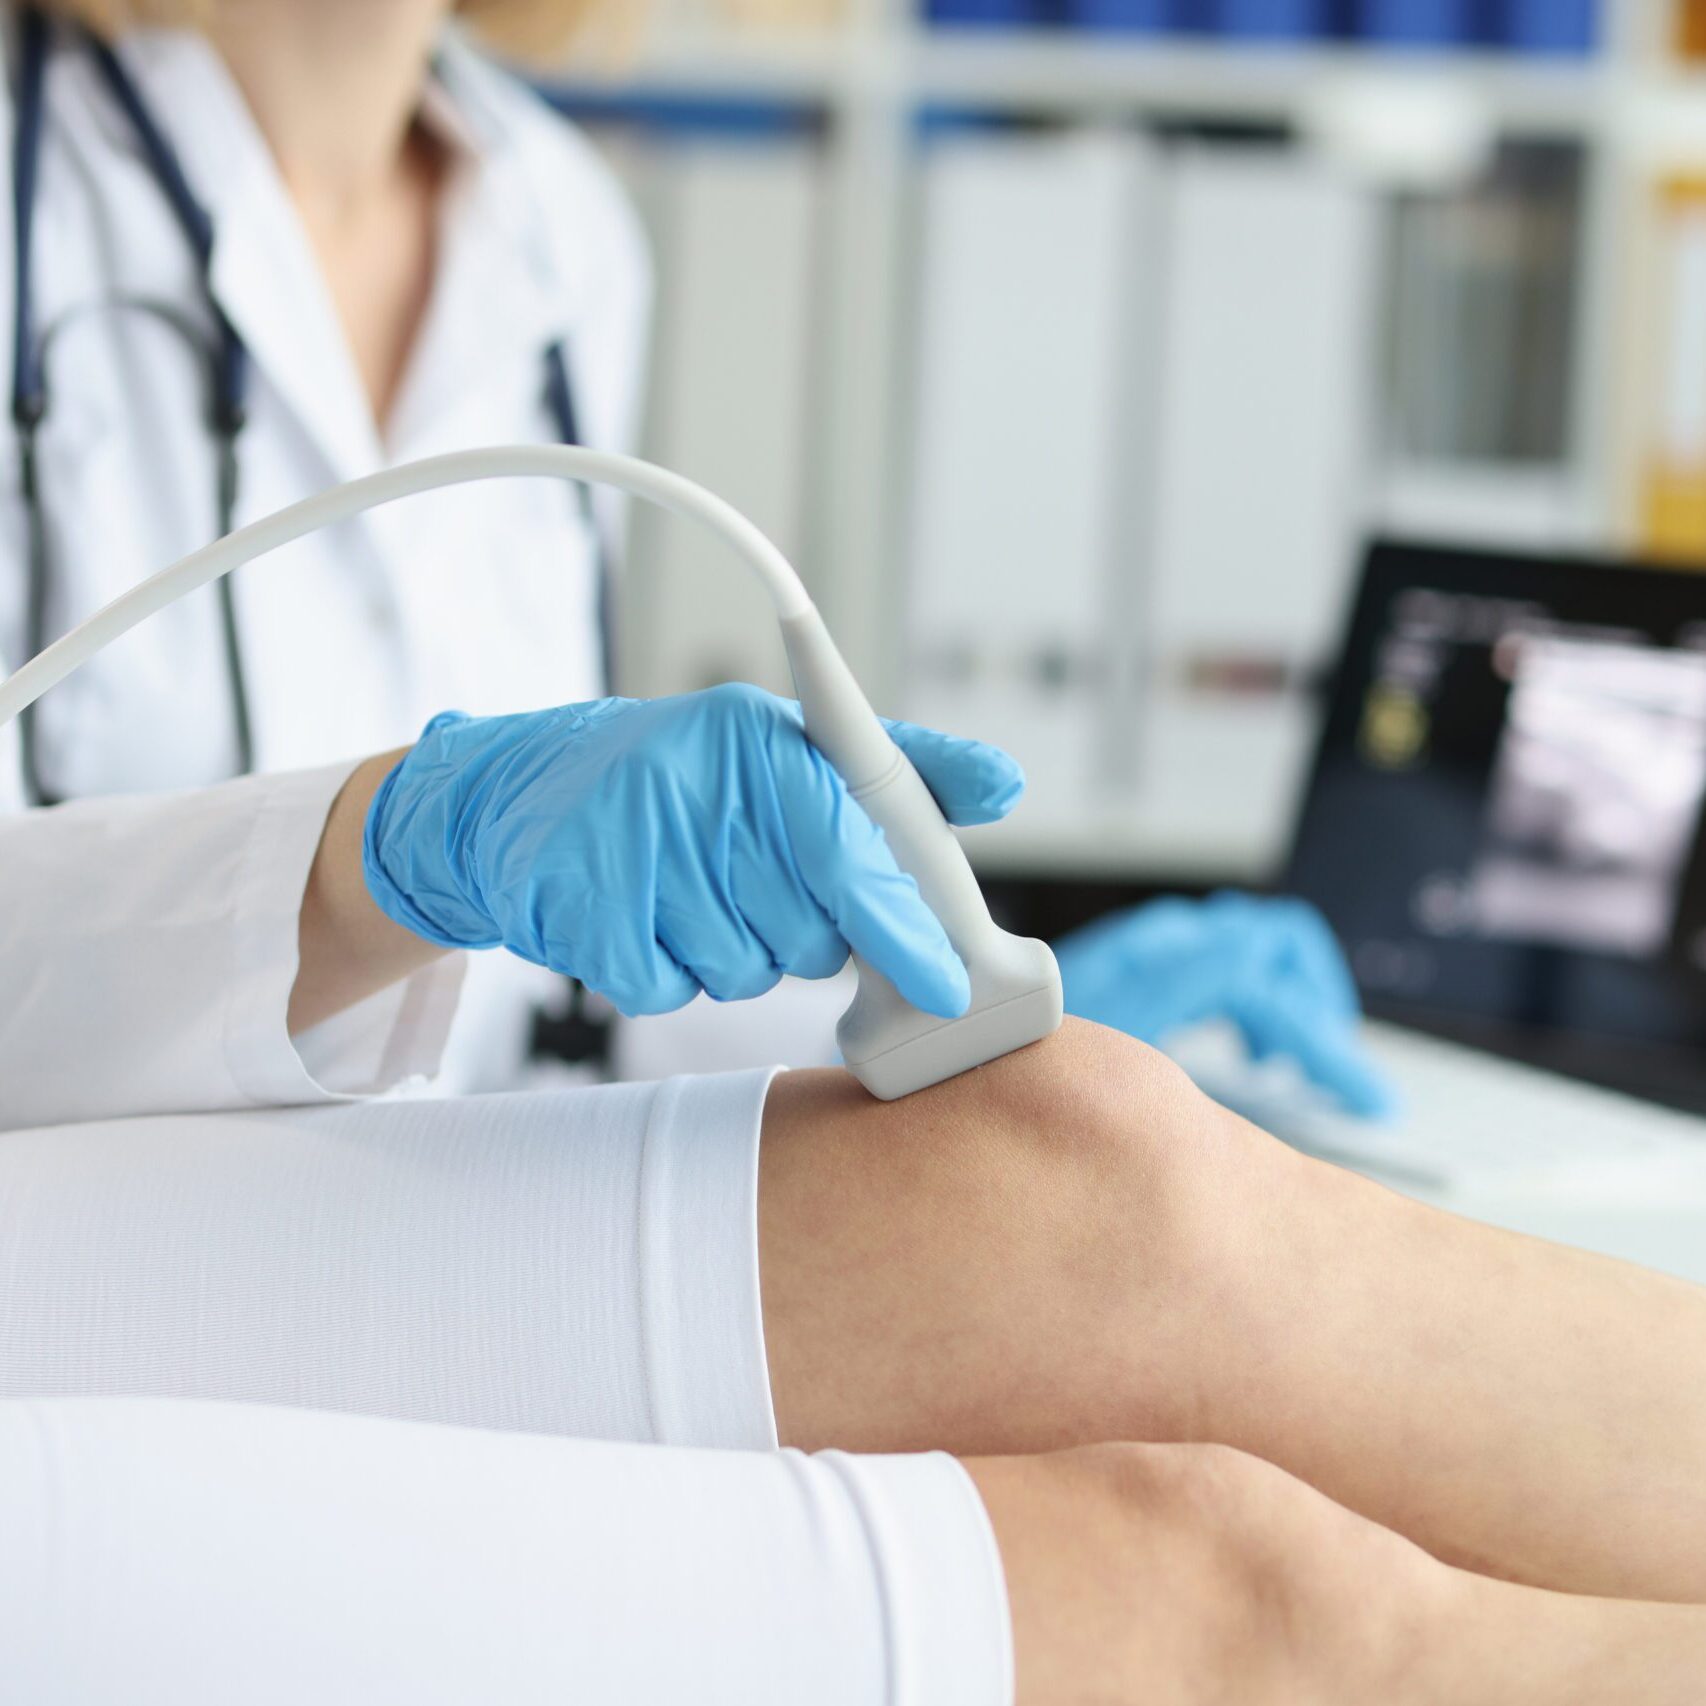 Orthopedic doctor makes ultrasound examination of patient knee in clinic